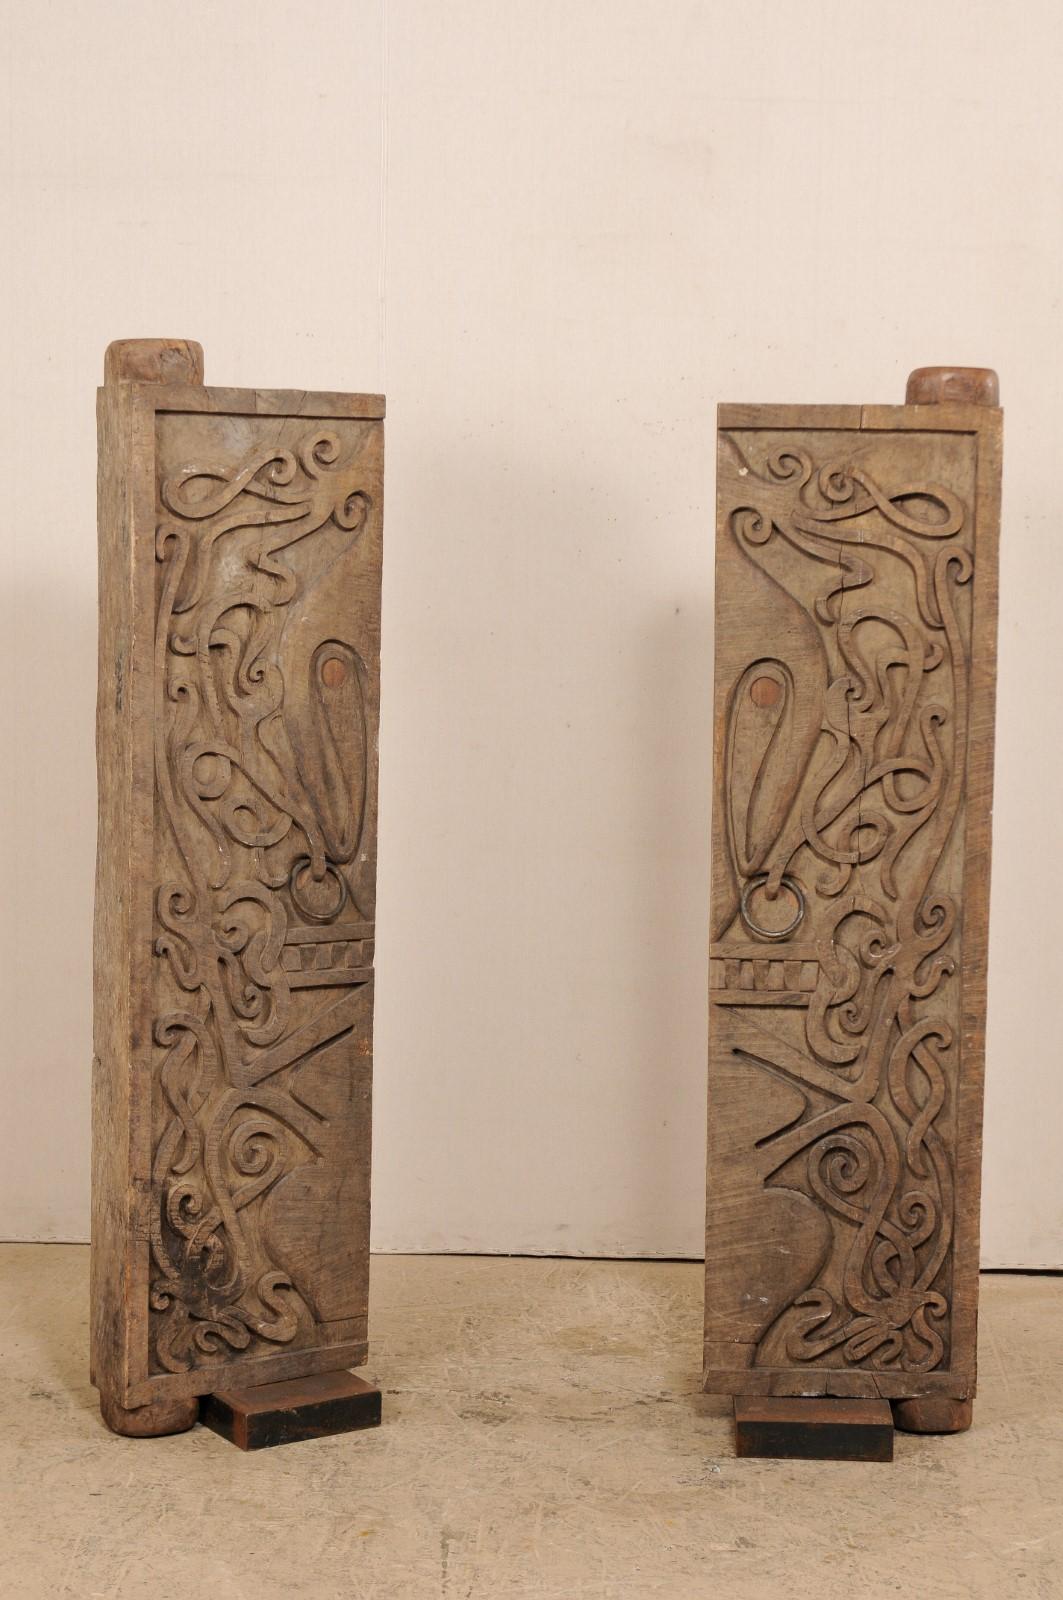 A pair of hand carved wooden doors from Borneo on custom iron bases, mid-20th century. This vintage pair of doors from the island of Borneo are nicely sized, being approximately 5.75